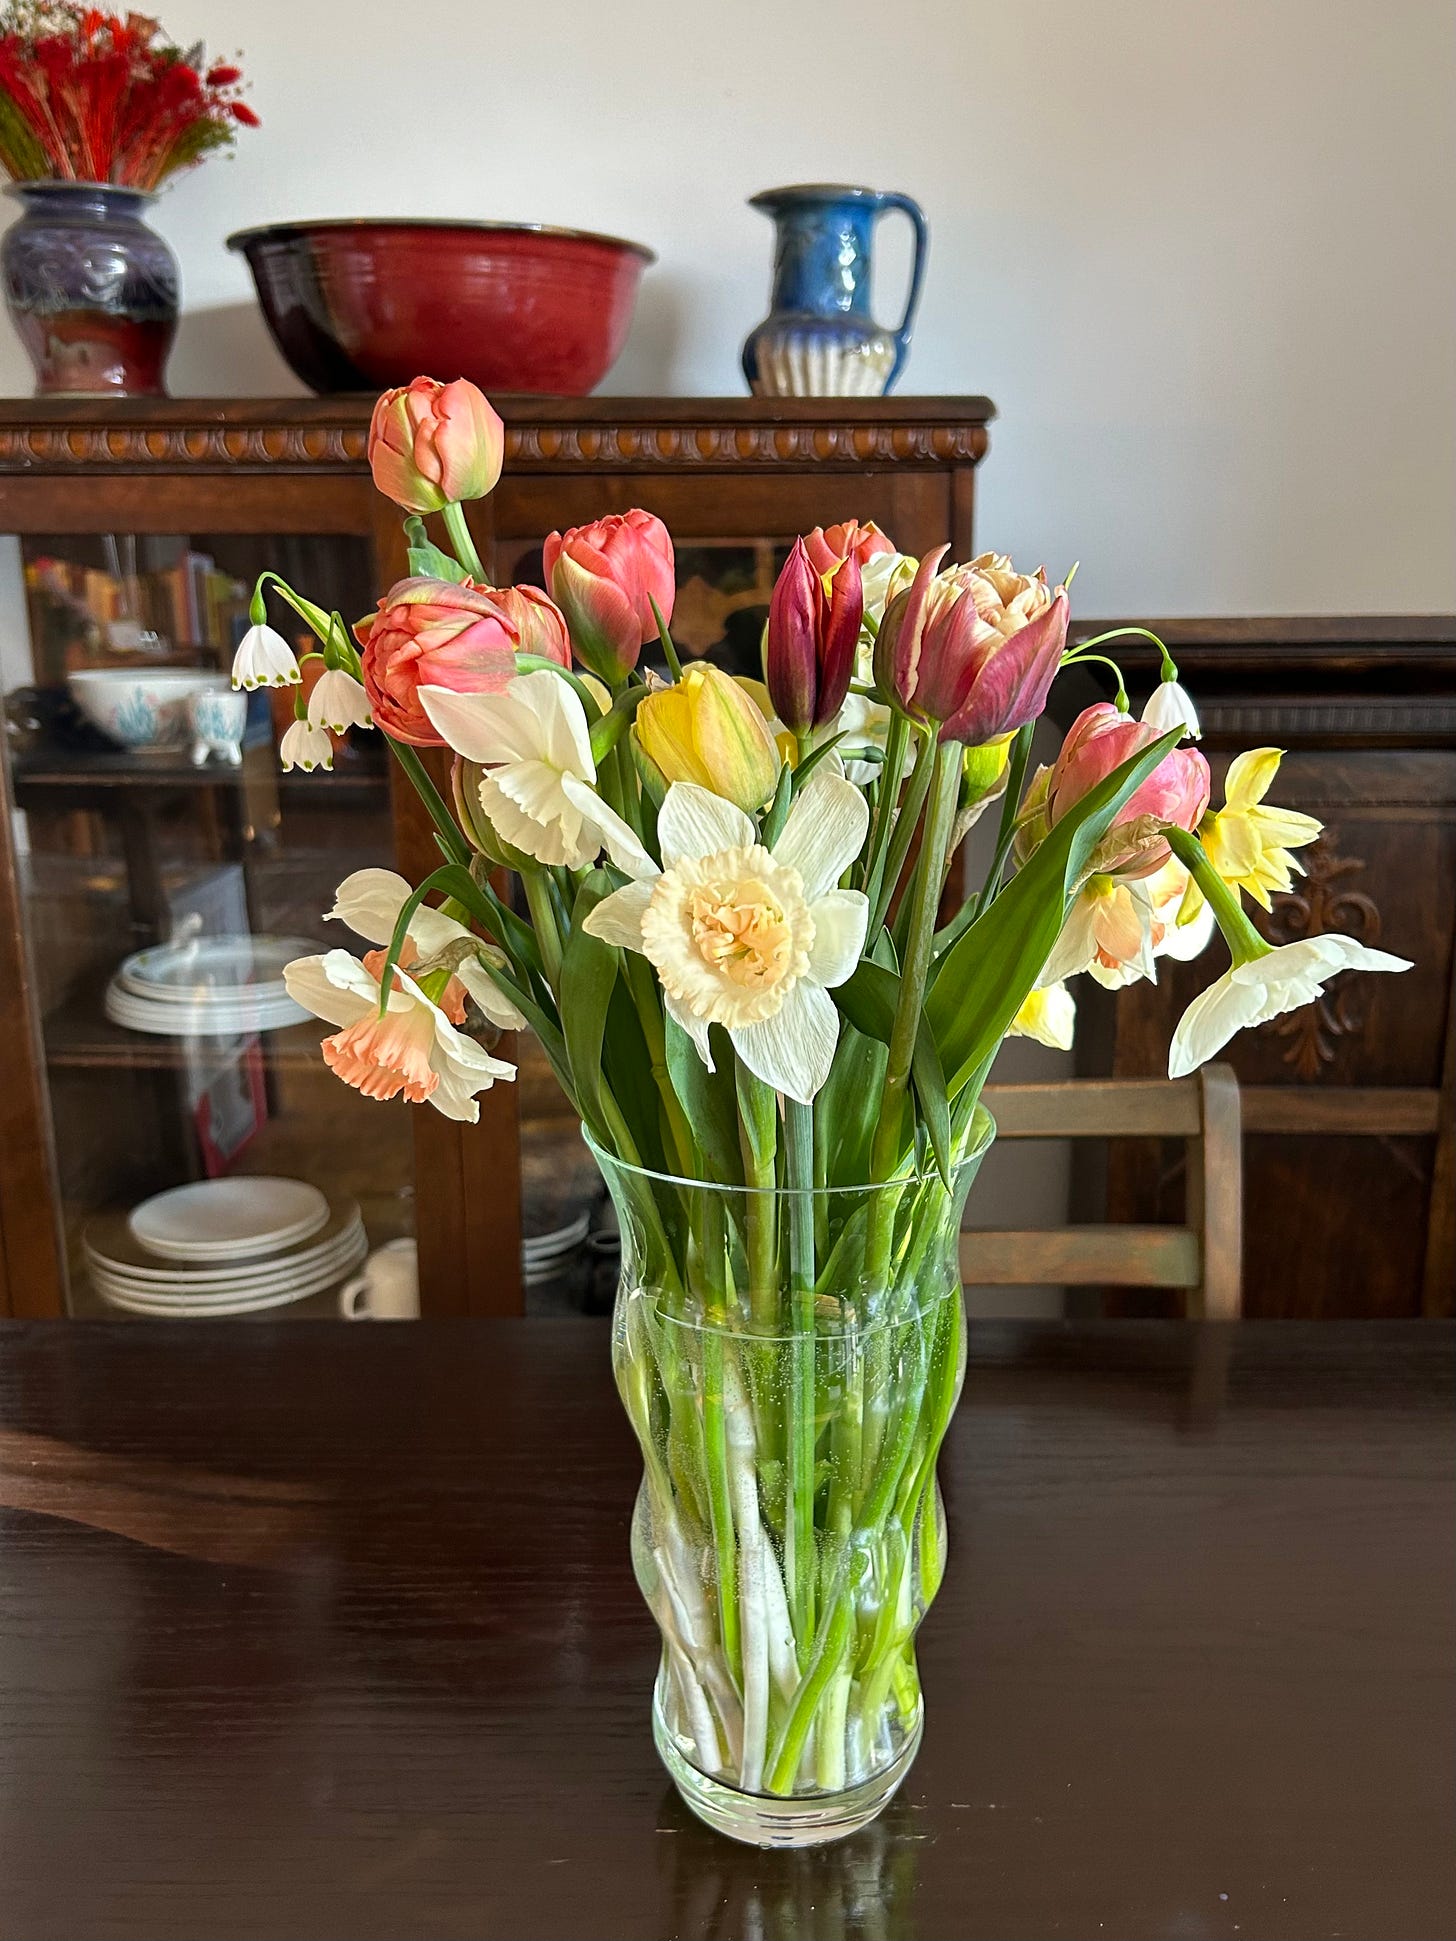 Glass vase of tulips on wood table.